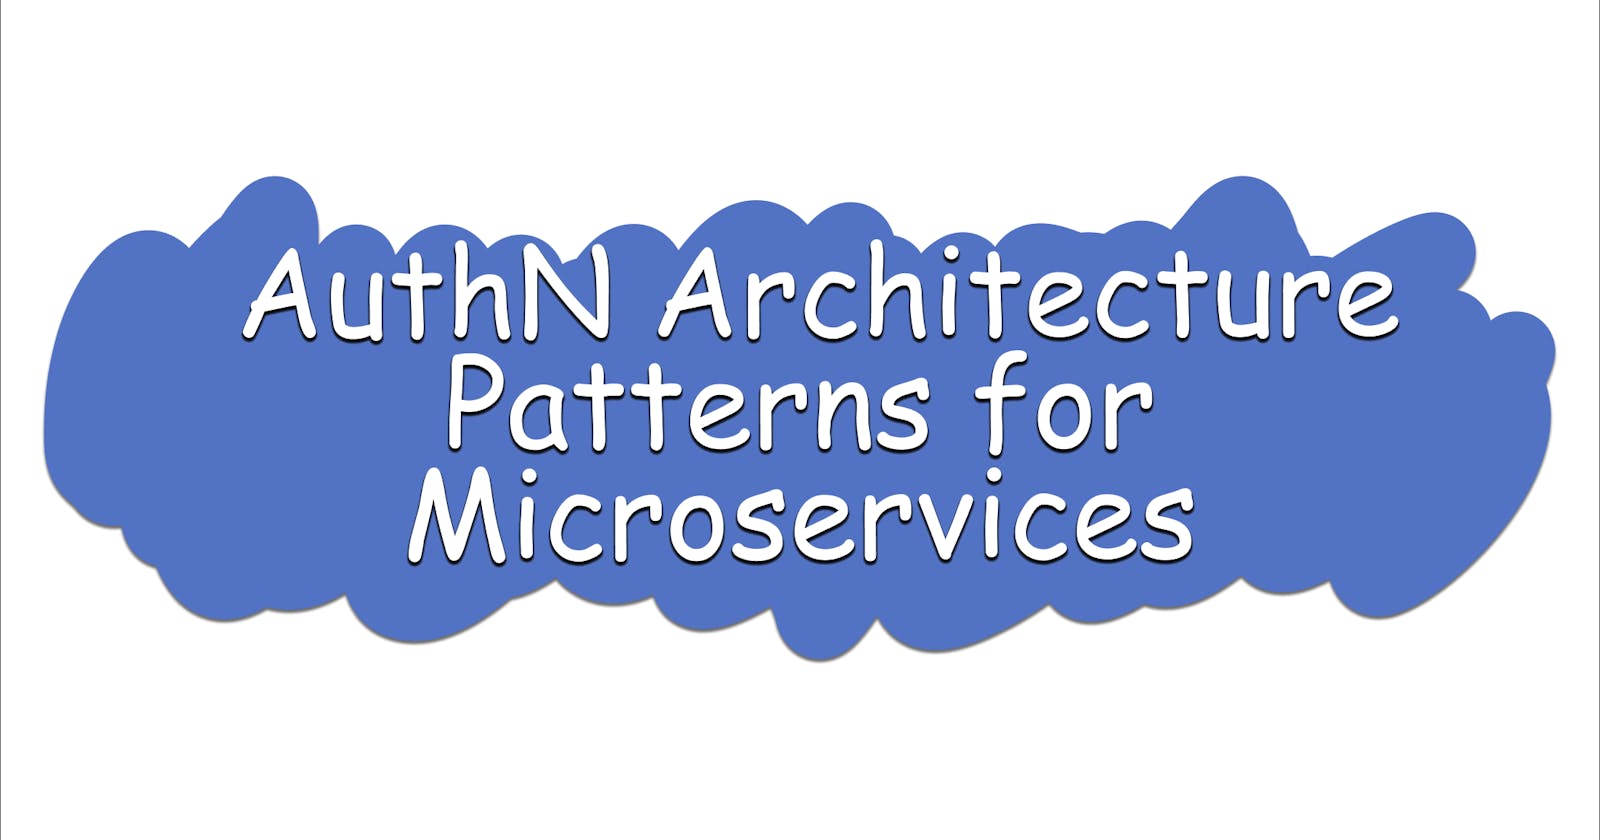 Authentication Architecture Patterns for Microservices